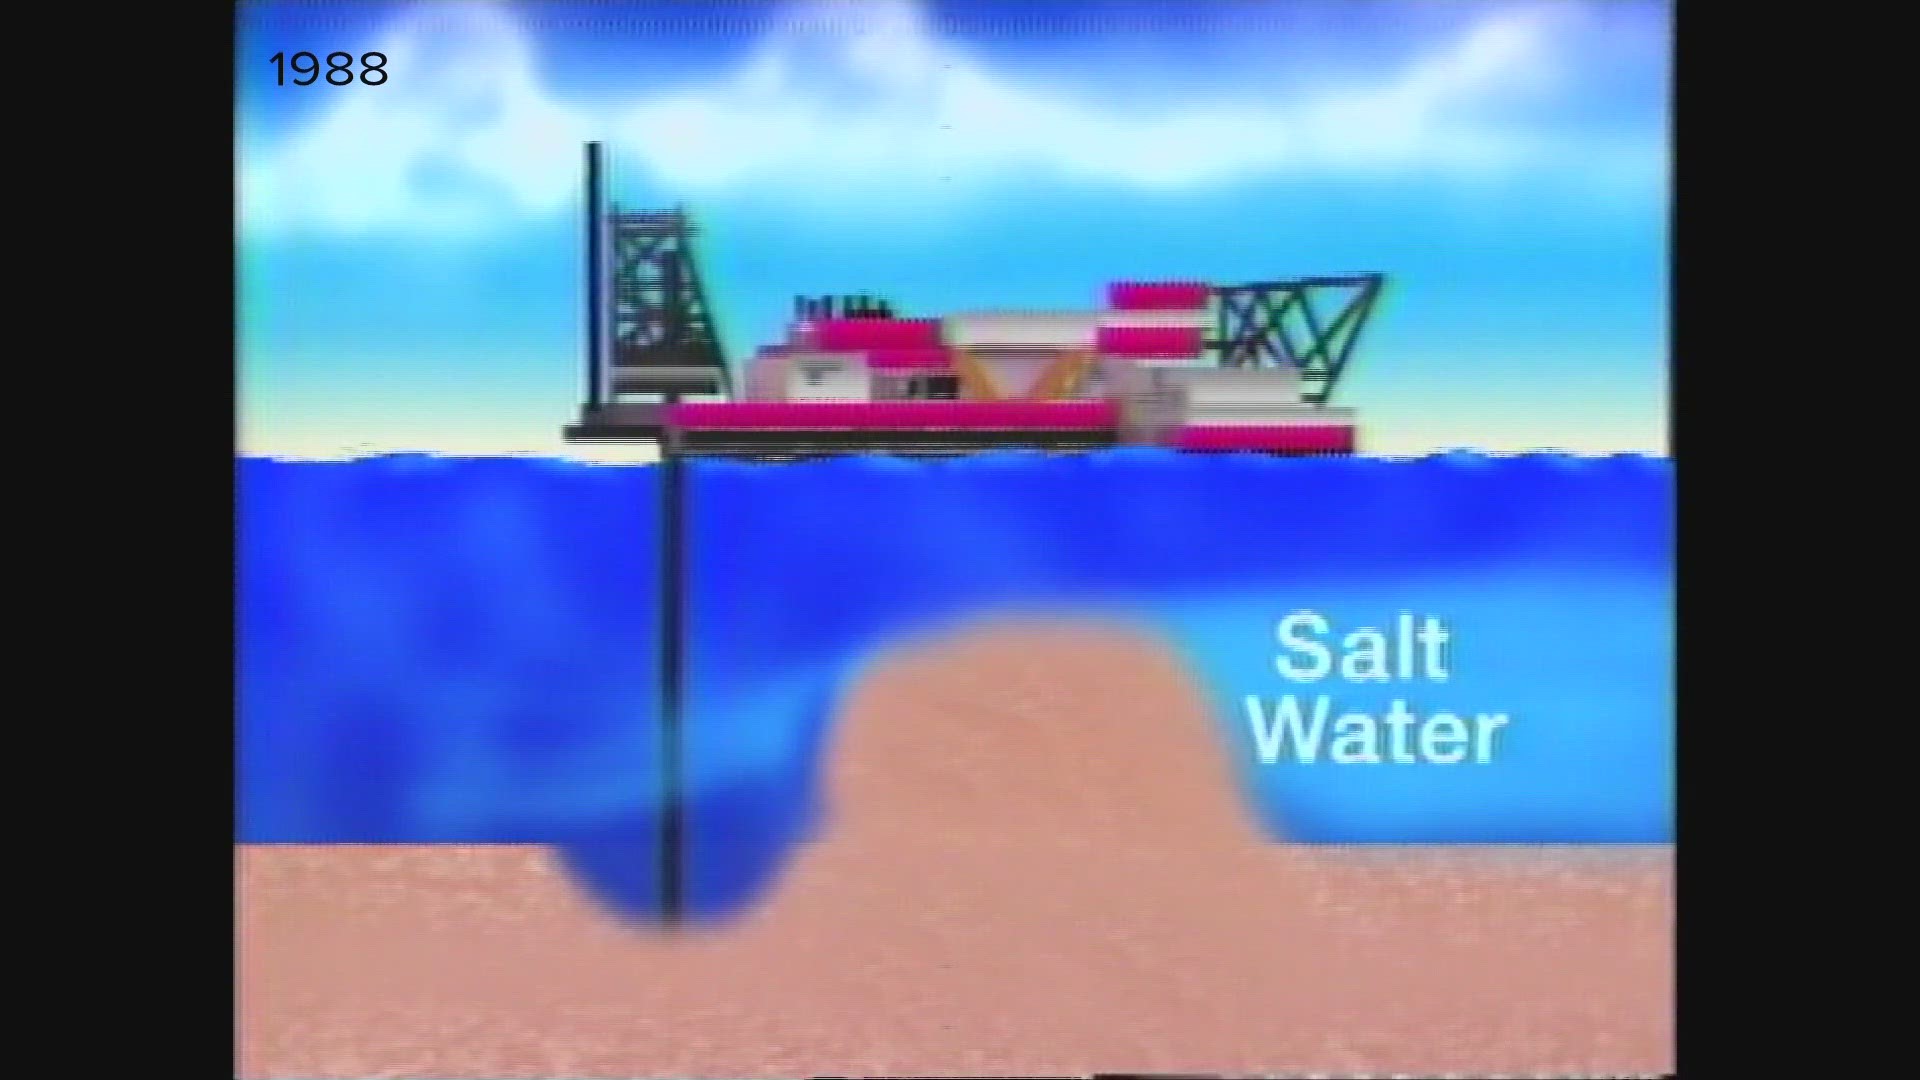 WWL-TV looks back at the saltwater intrusion in 1988.